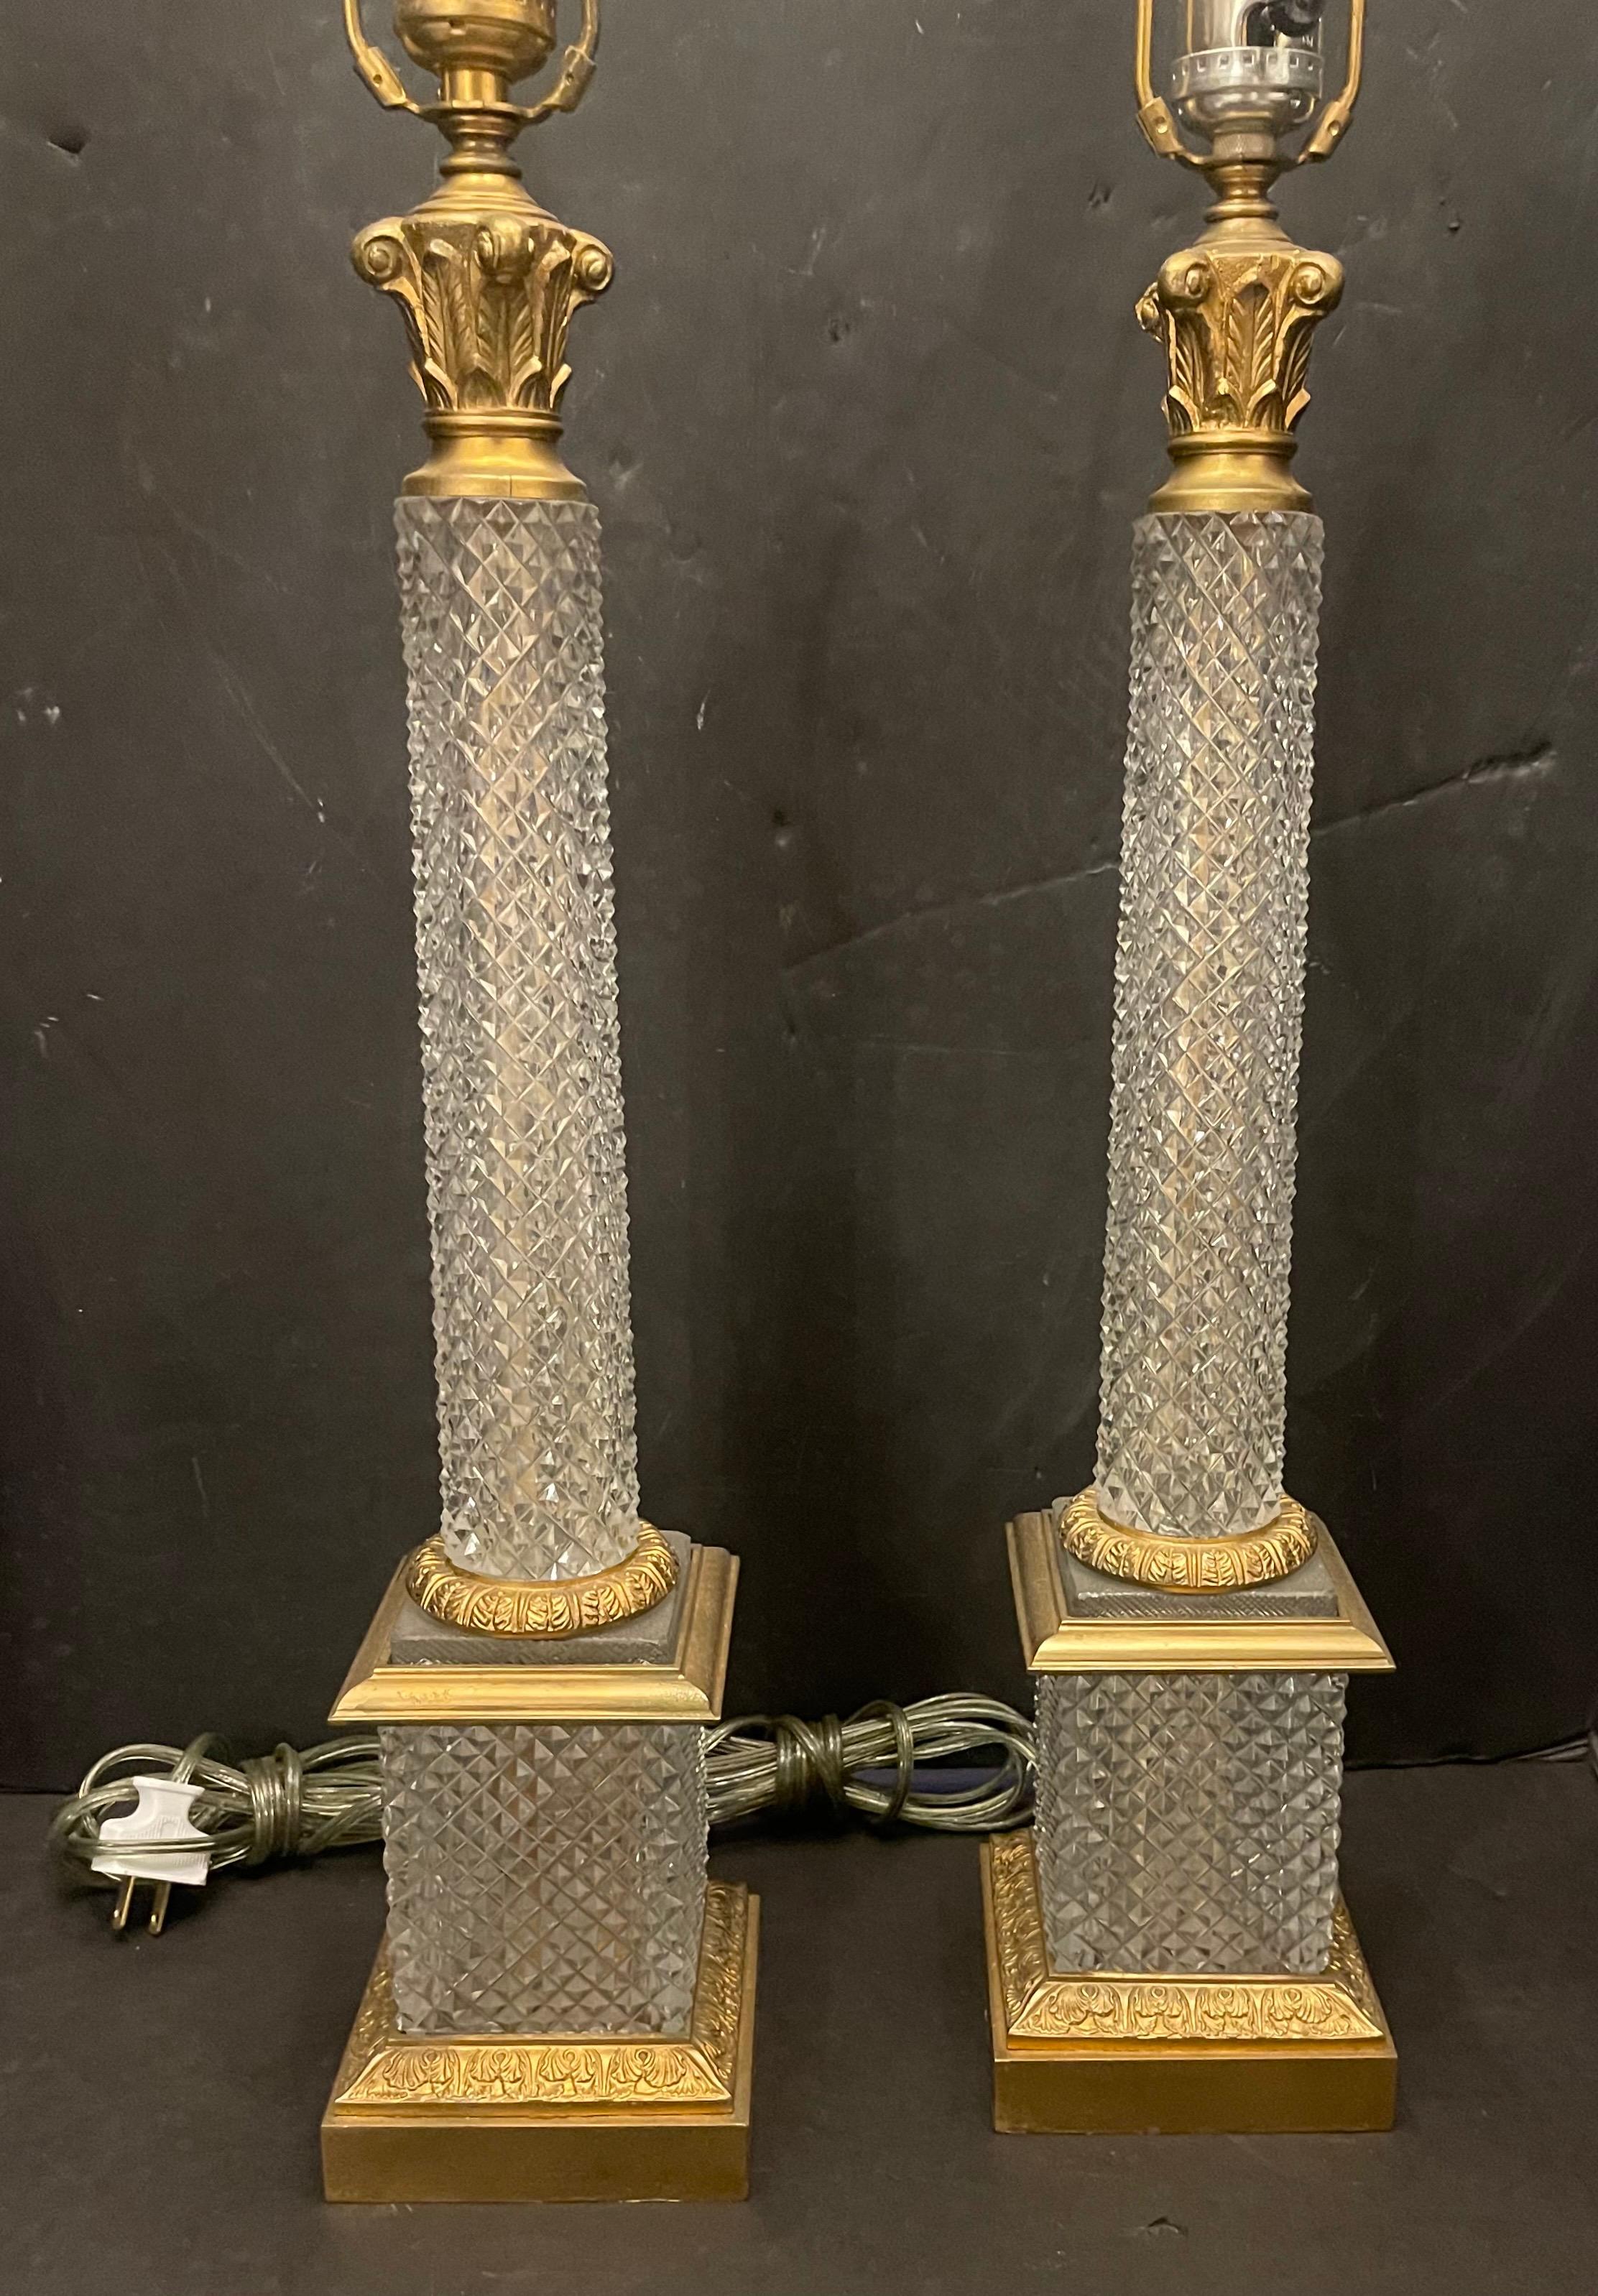 A Wonderful Pair Of Baccarat Style French Faceted Cut Crystal & Bronze Ormolu Mounted Column Form Lamps